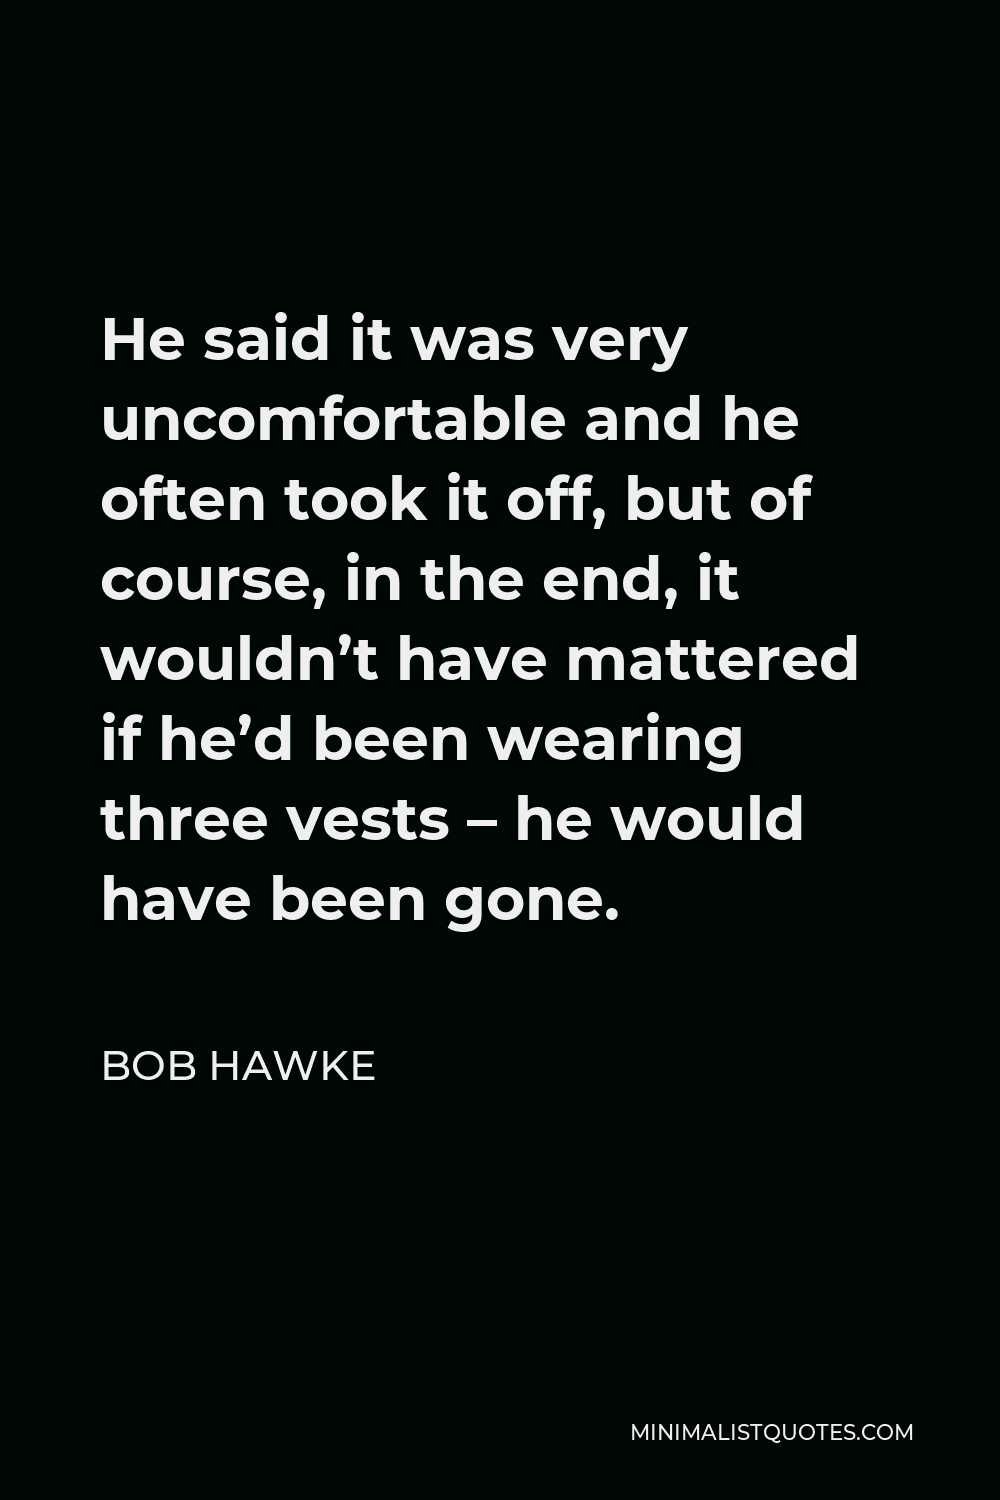 Bob Hawke Quote - He said it was very uncomfortable and he often took it off, but of course, in the end, it wouldn’t have mattered if he’d been wearing three vests – he would have been gone.